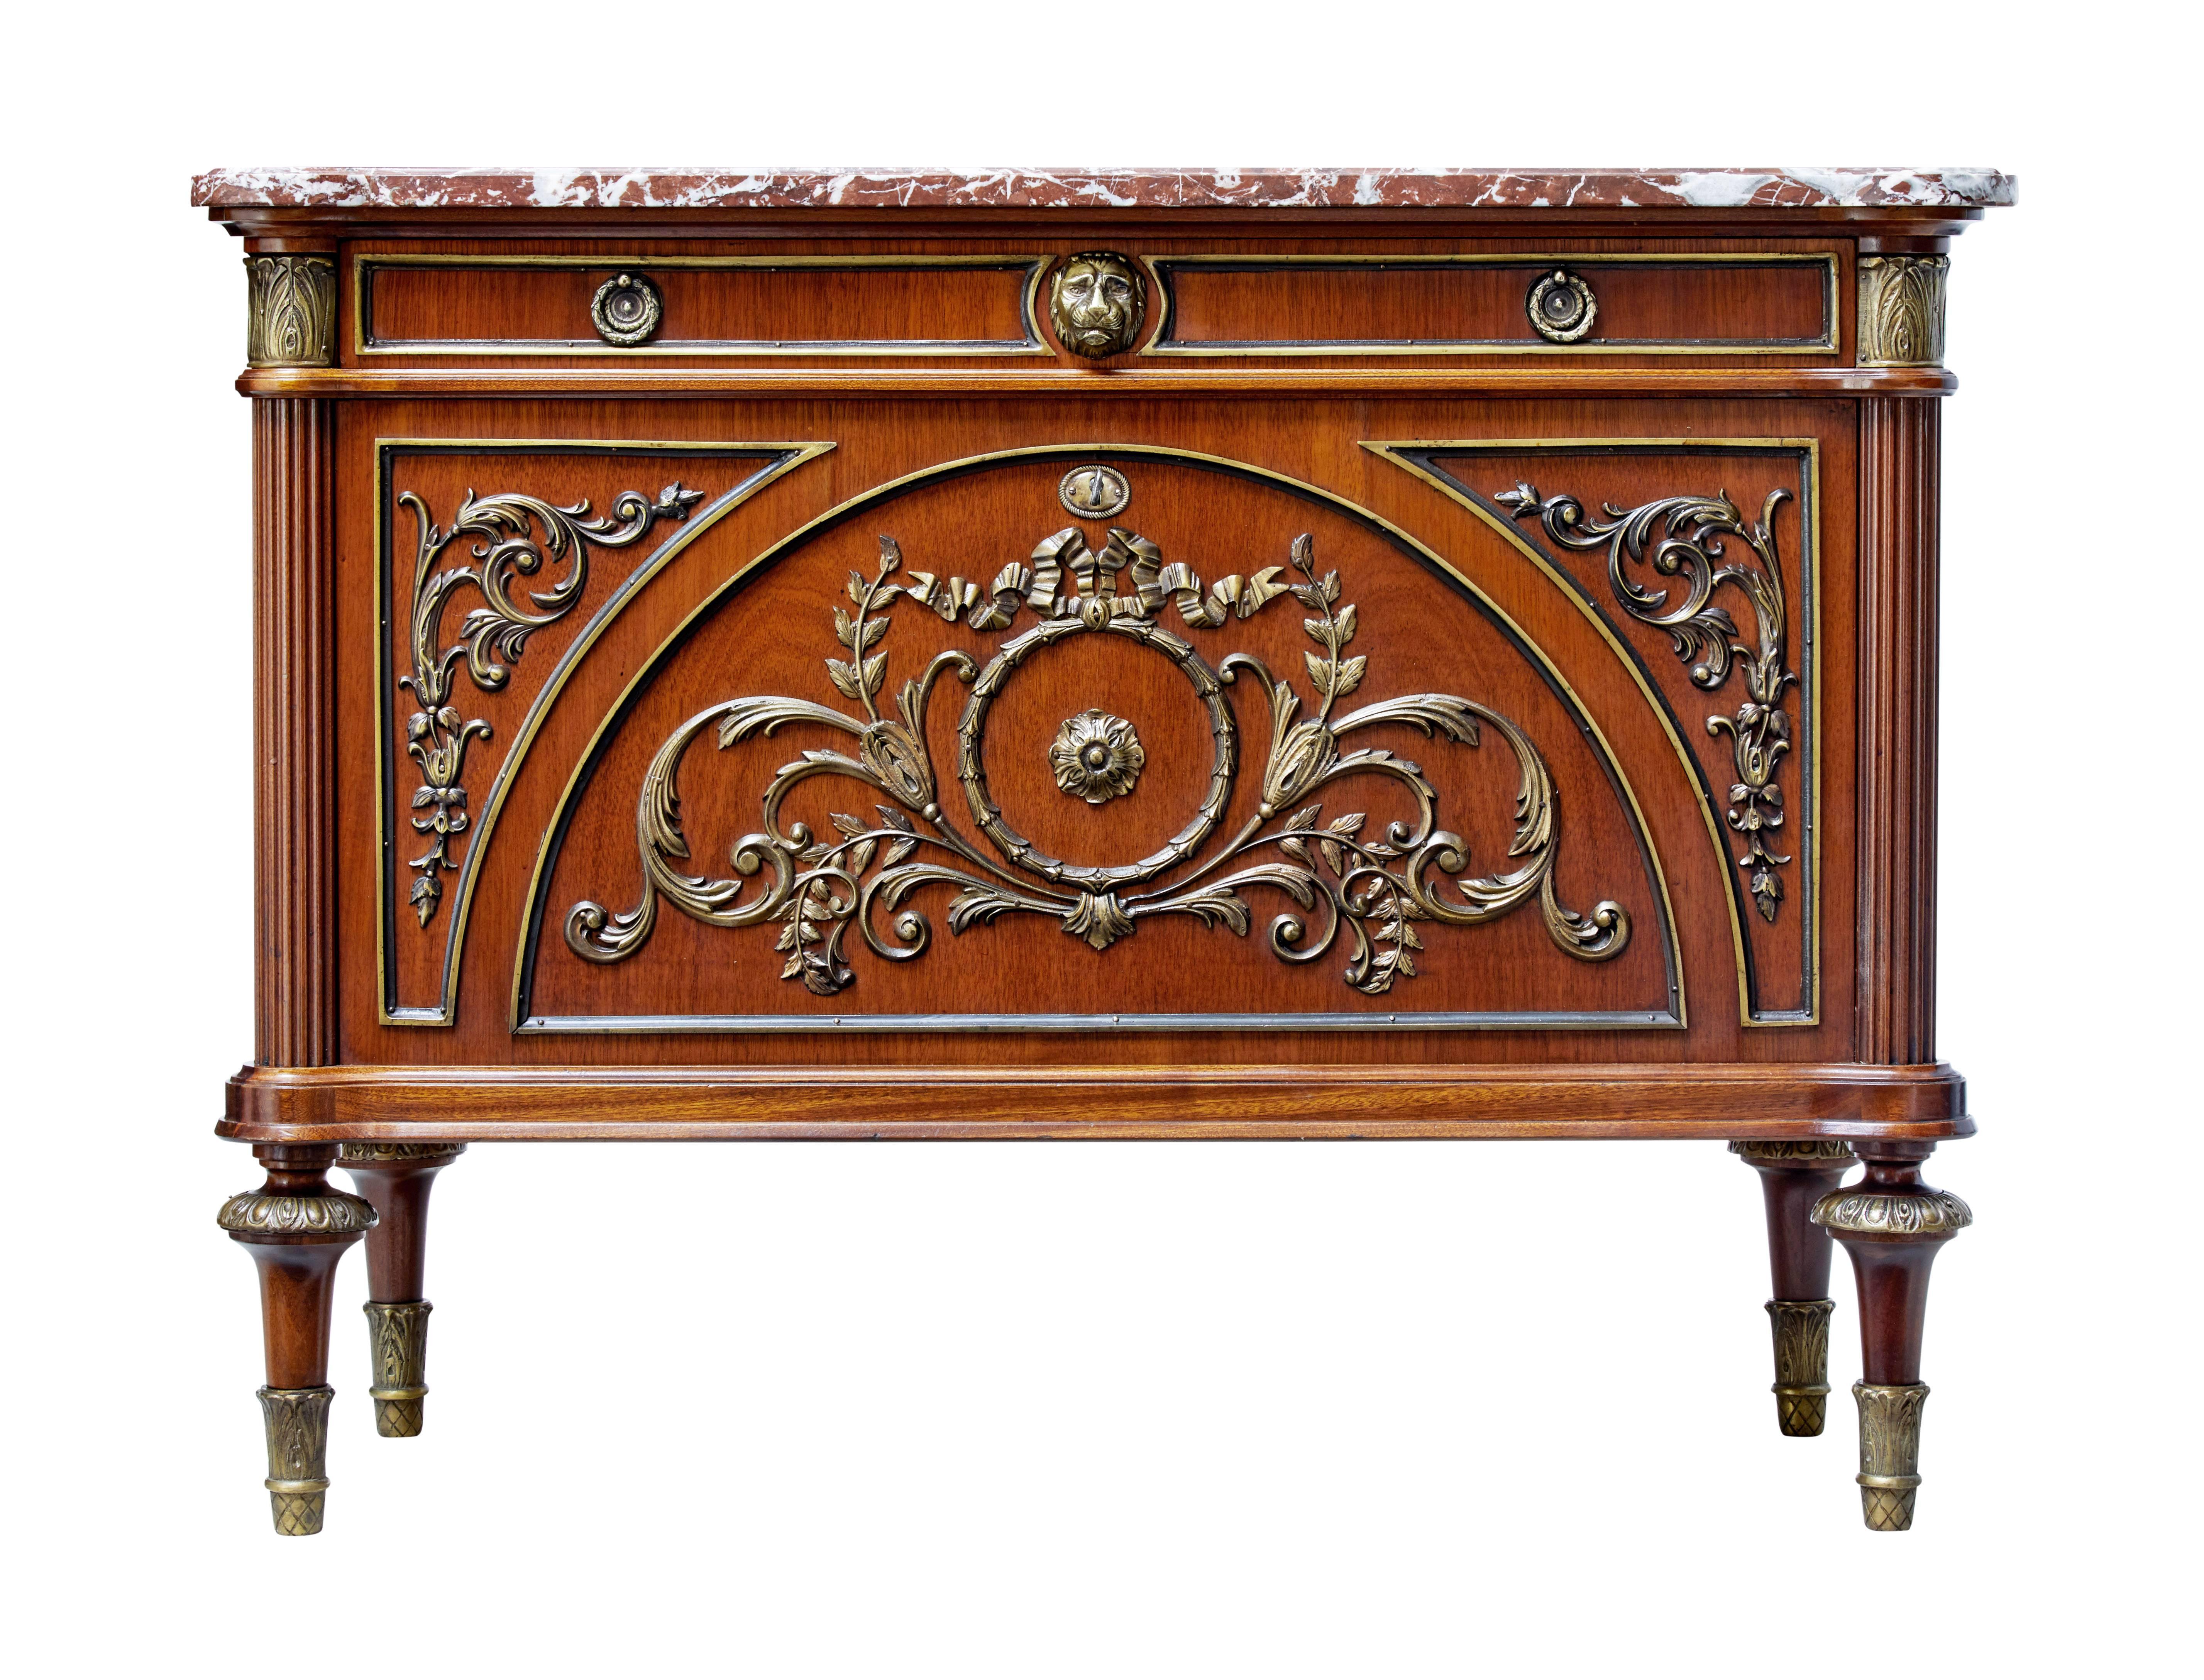 Fine quality 1960s ormolu, mahogany and marble top commode.

Single drawer with drop down front to reveal a further two fitted drawers.

Beautifully applied ormolu and brass decoration. Fluted columns to the sides.

Marble top is loose fitting